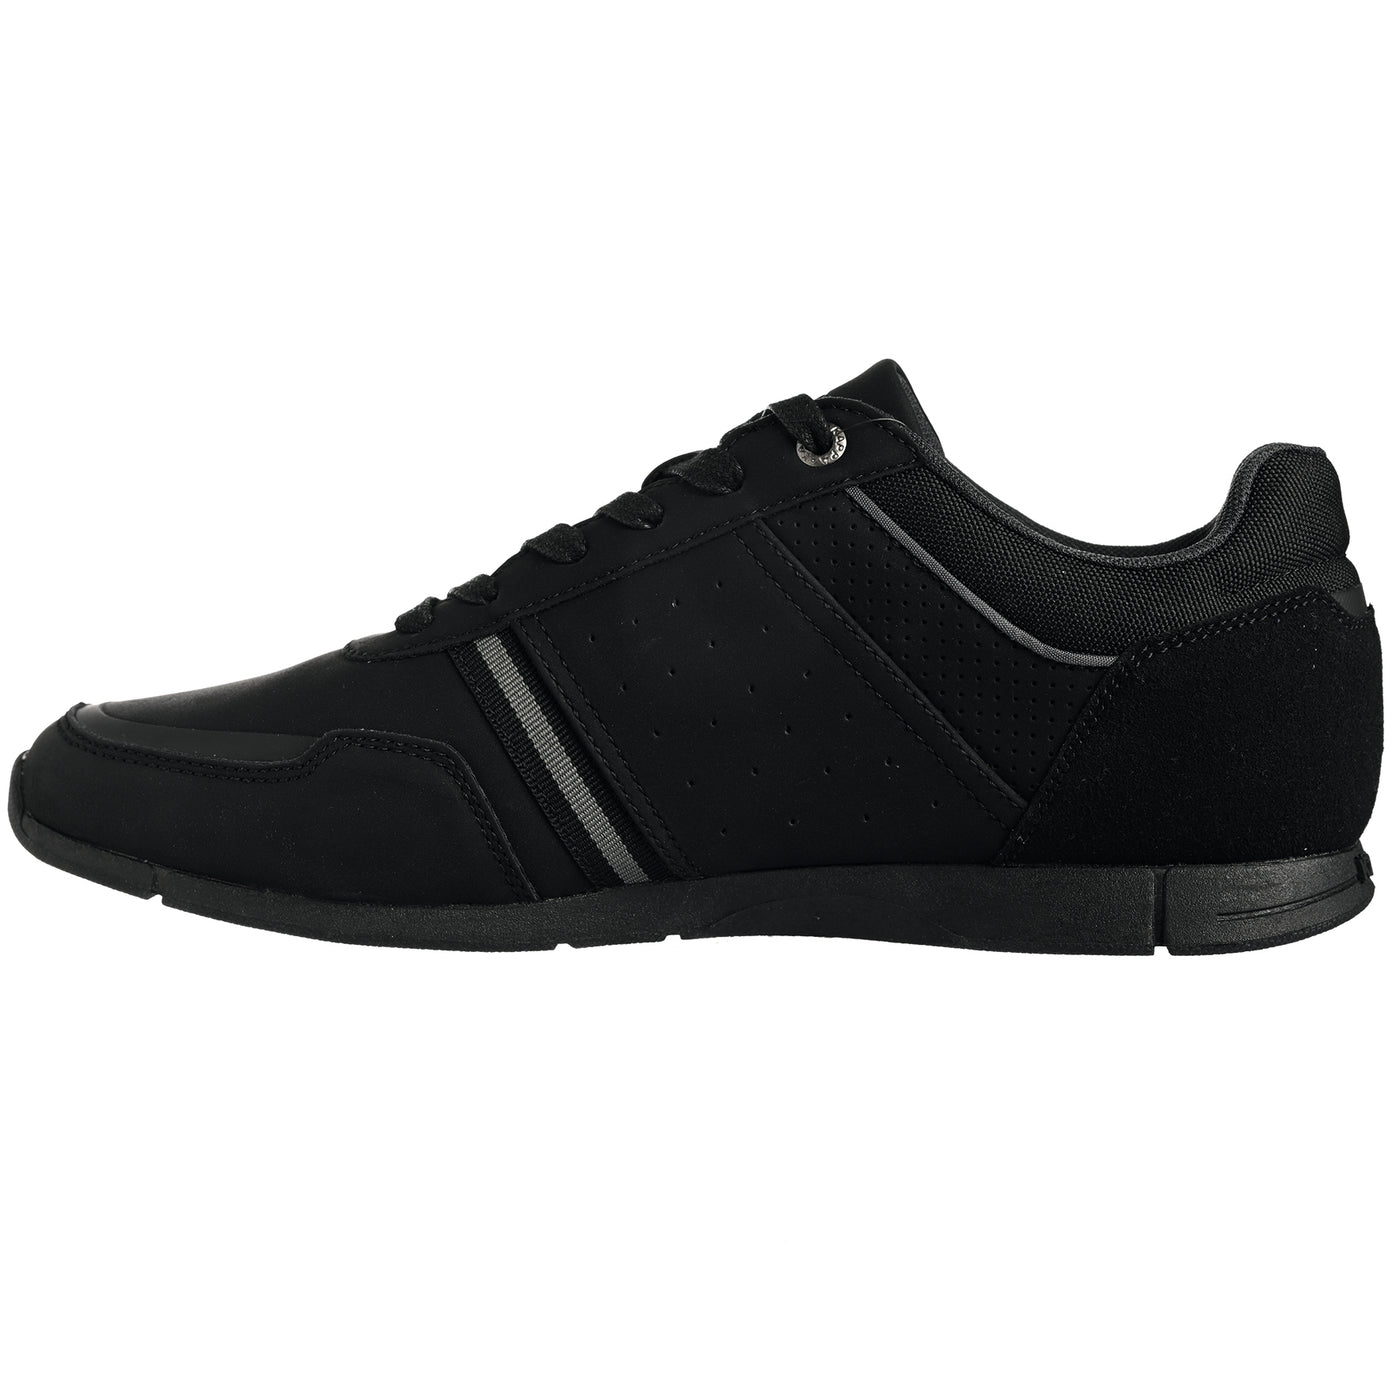 Chaussures lifestyle Tyler noir homme